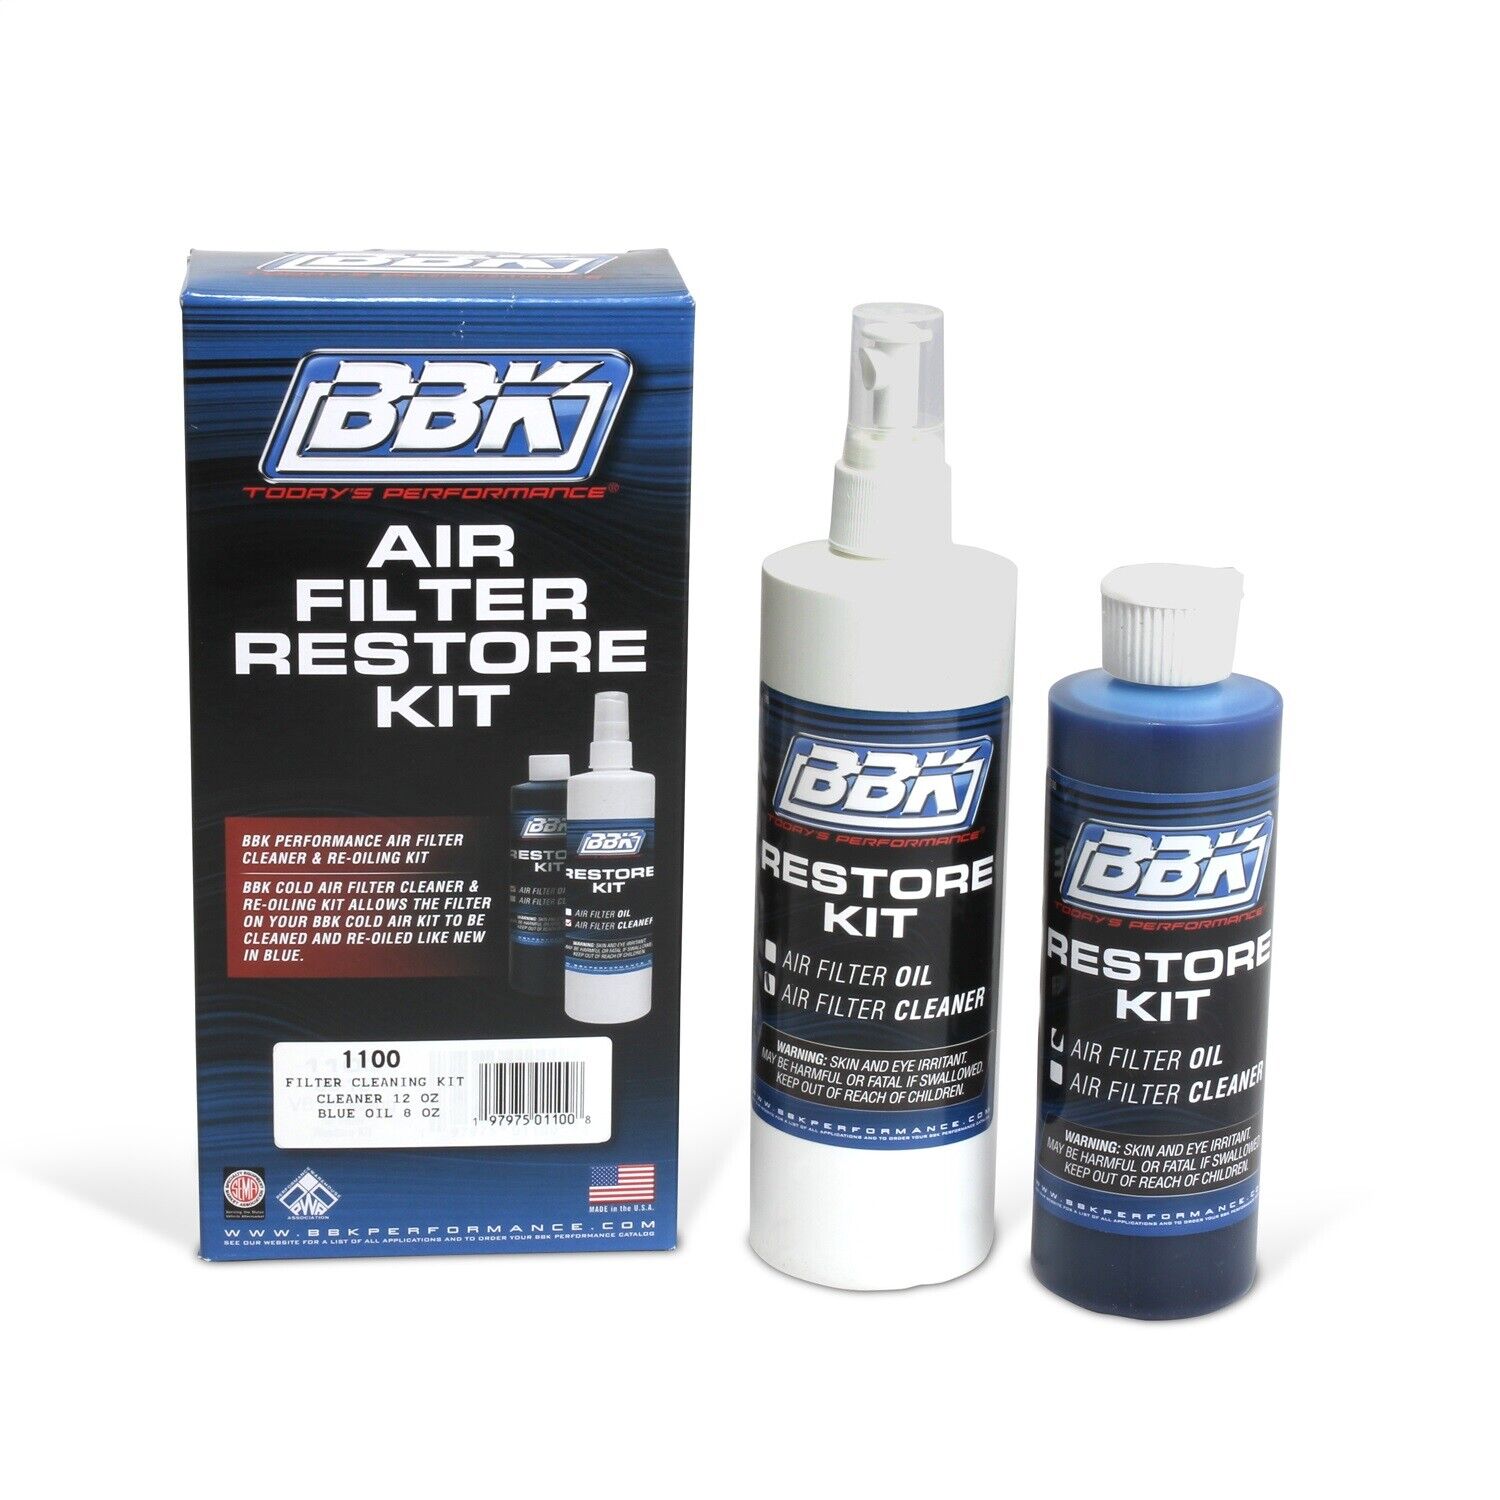 BBK Performance 1100 Cold Air Intake Filter Cleaner/Re-Oiling Kit - Blue Oil